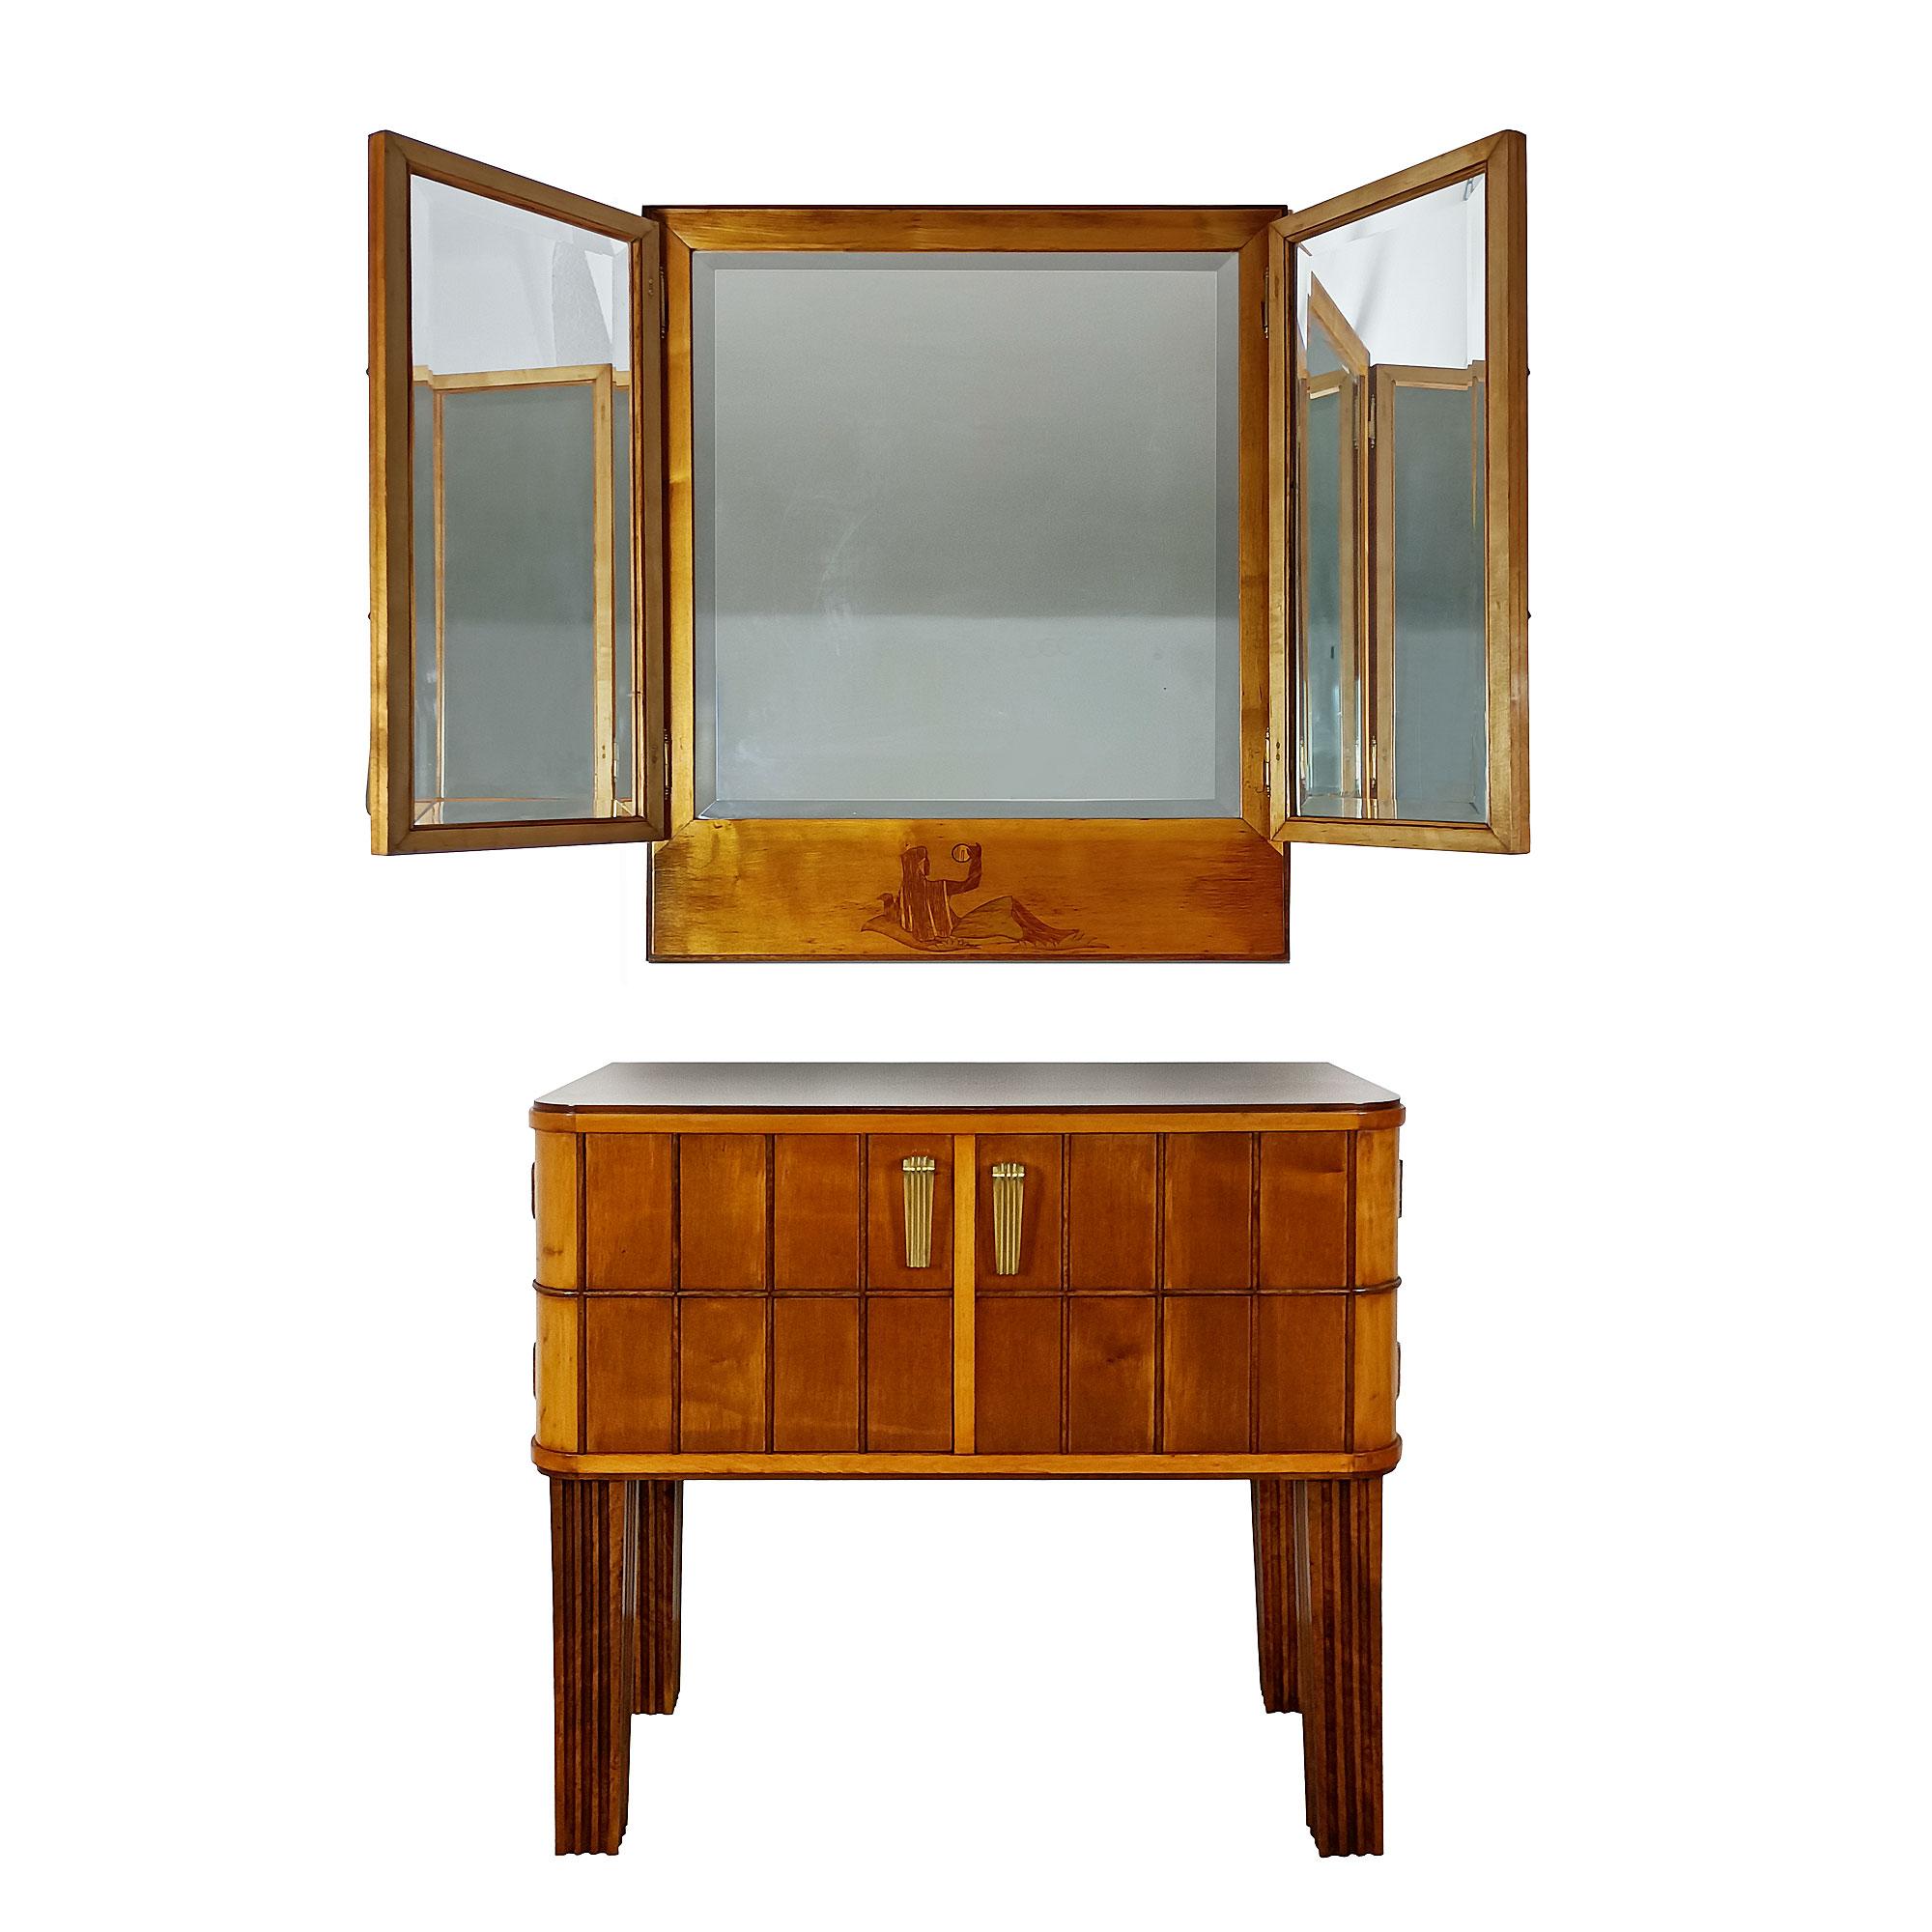 Art Deco vanity unit, solid walnut (legs and mouldings) and maple veneer. The lower unit opens onto two storage spaces surmounted by a triptych of bevelled mirrors hidden by two doors inlaid with the initials of the newlyweds and a feminine motif.